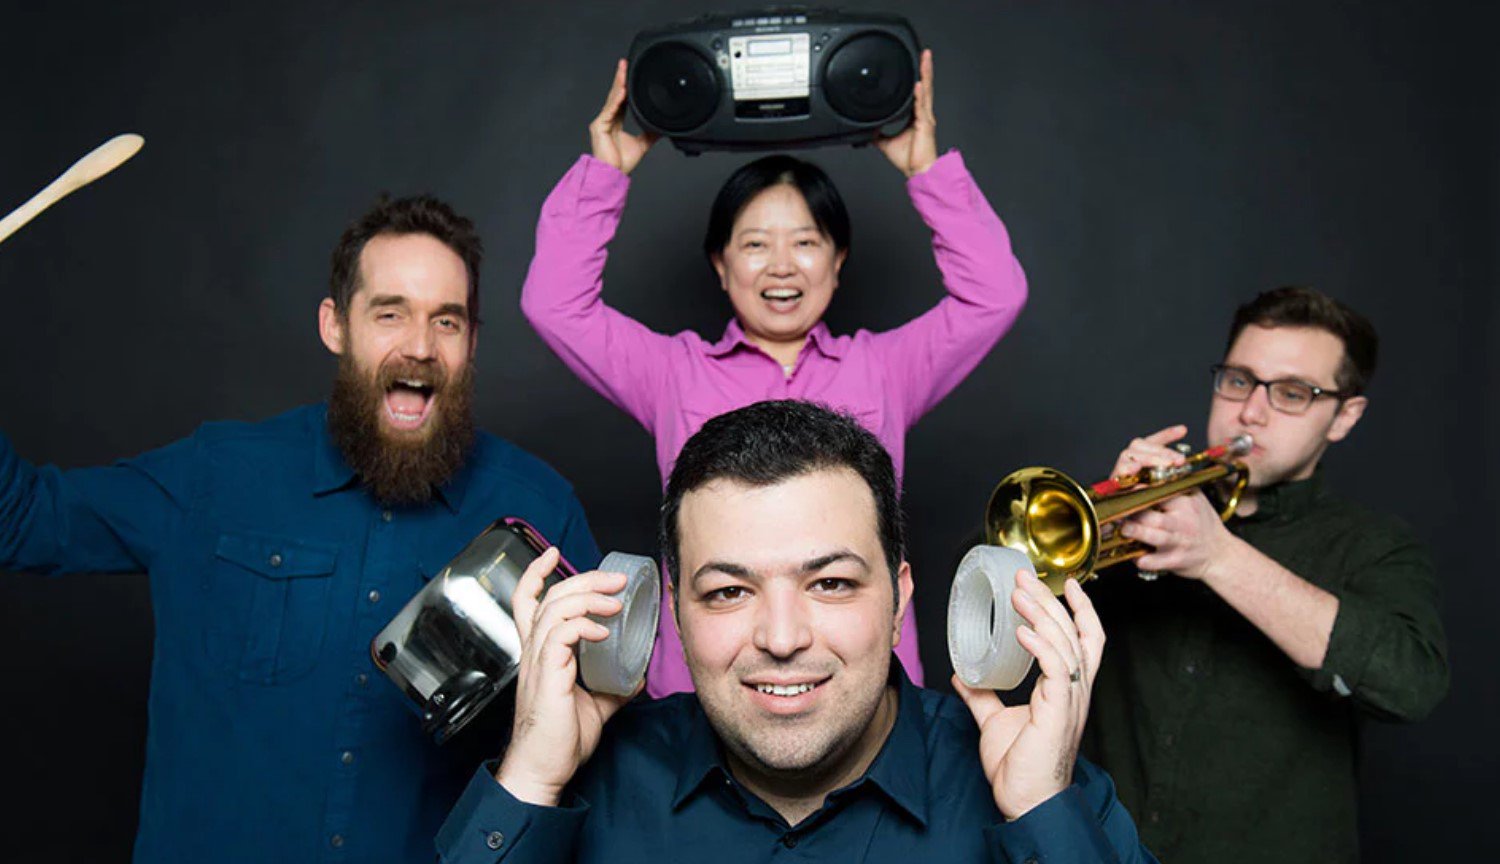 Possible: a device that mutes the music without blocking air